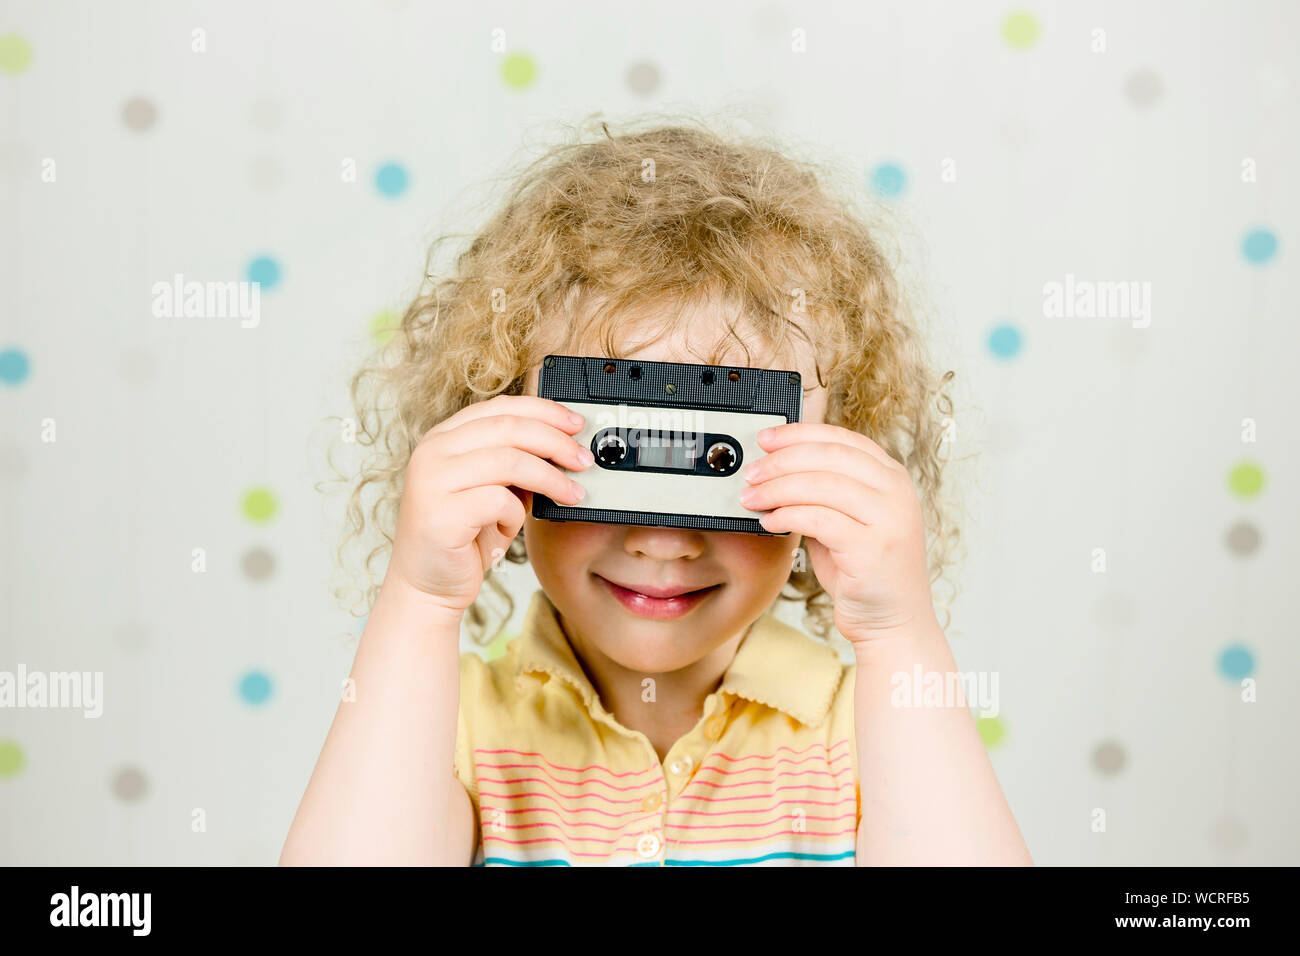 Funny picture of 5 year old girl holding and looking through retro 80s cassette tape indoors, light background. Stock Photo